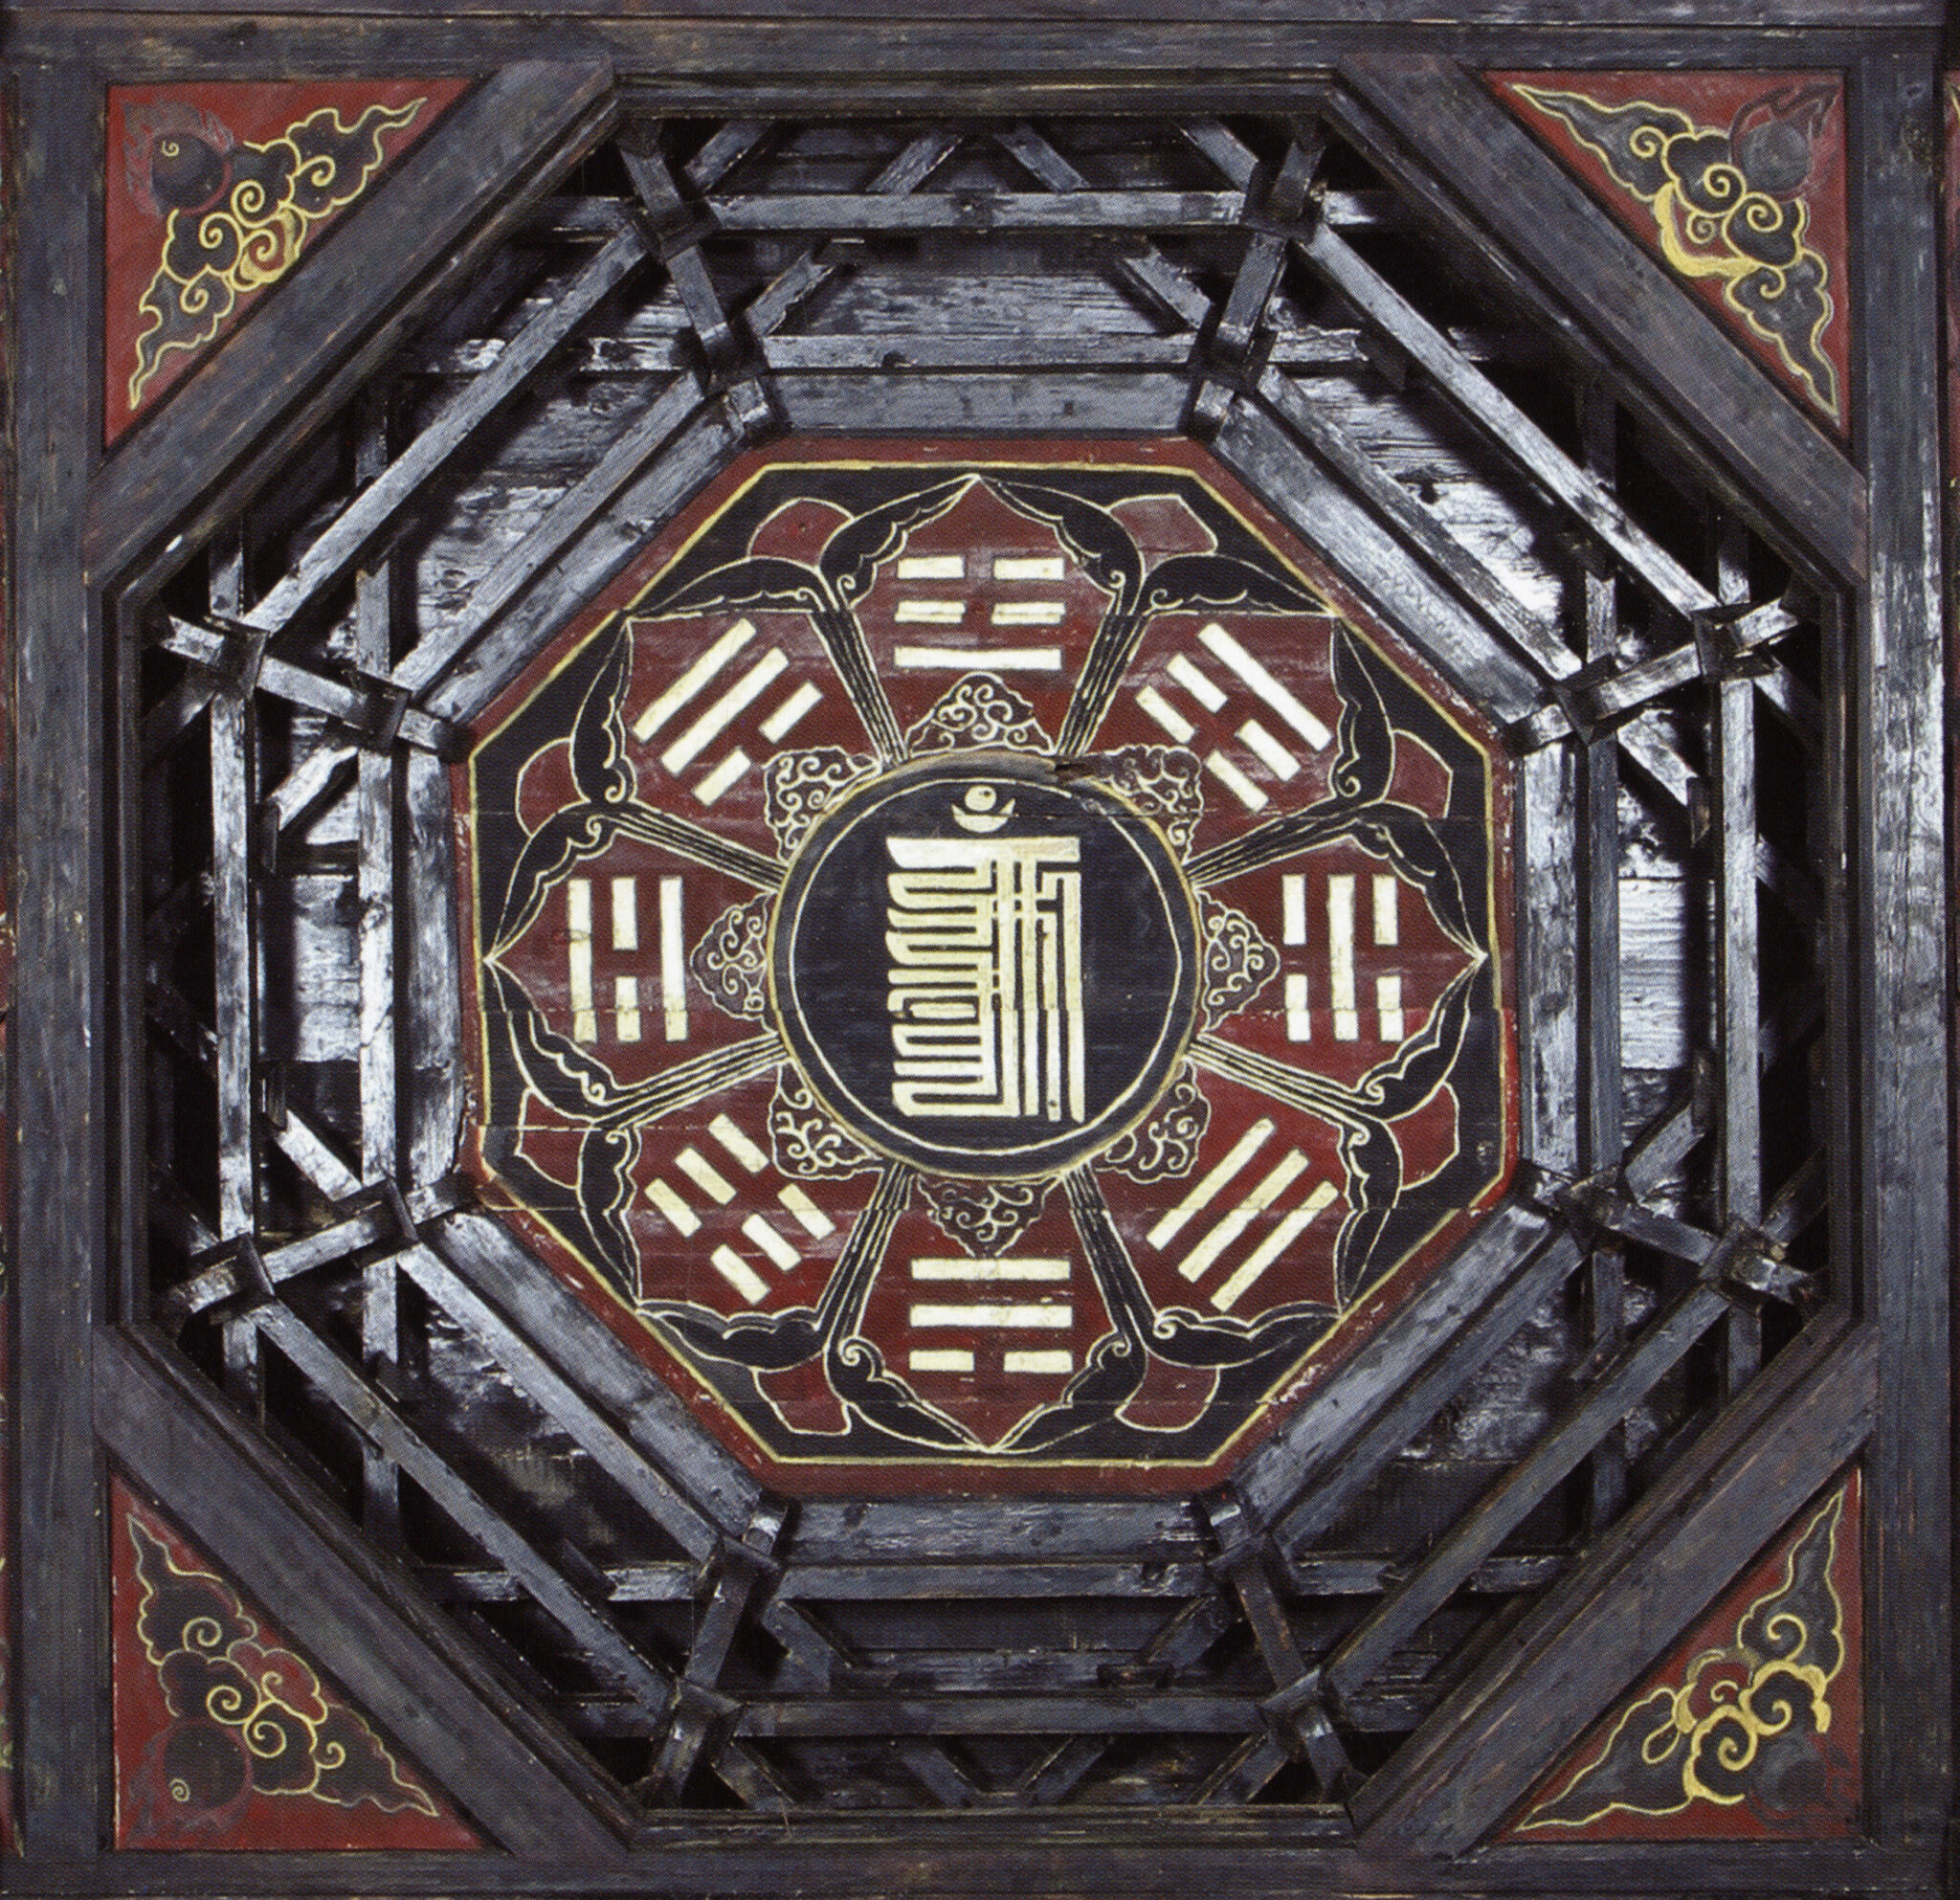 Characters painted on octagonal ceiling: elaborate character at center surrounded by characters on lotus petals